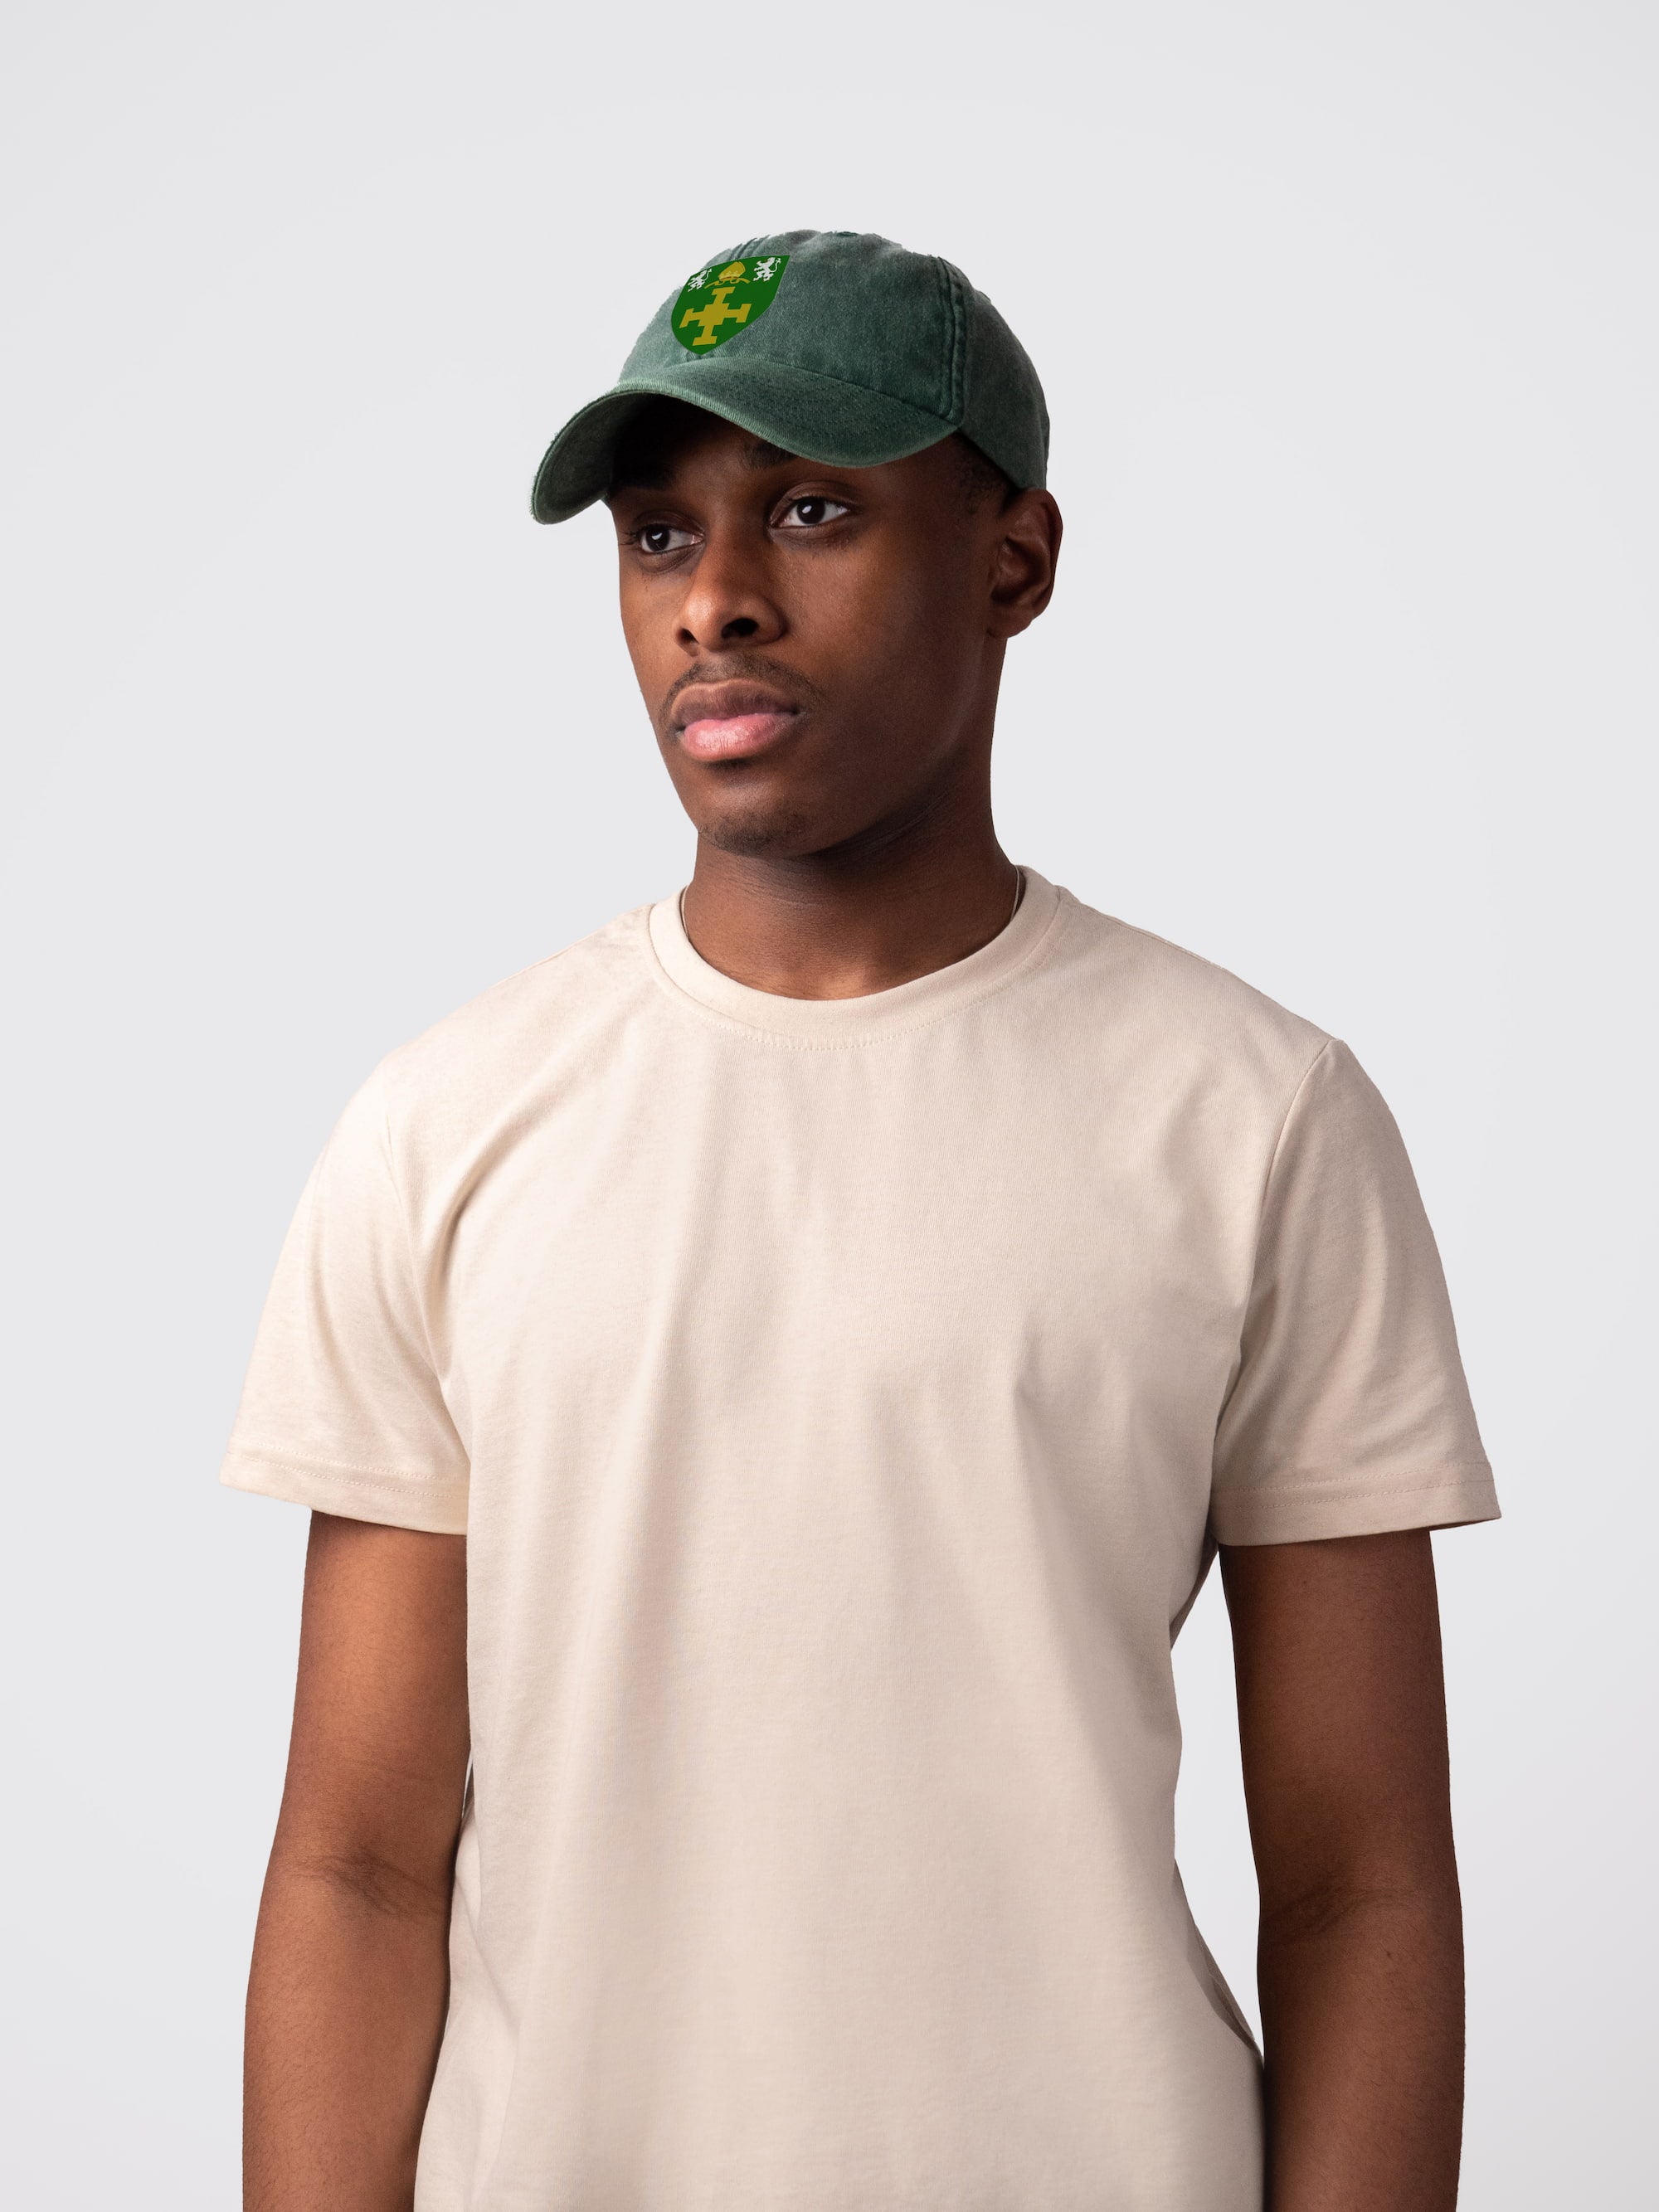 St Chad's College vintage cap in bottle green, from Redbird Apparel